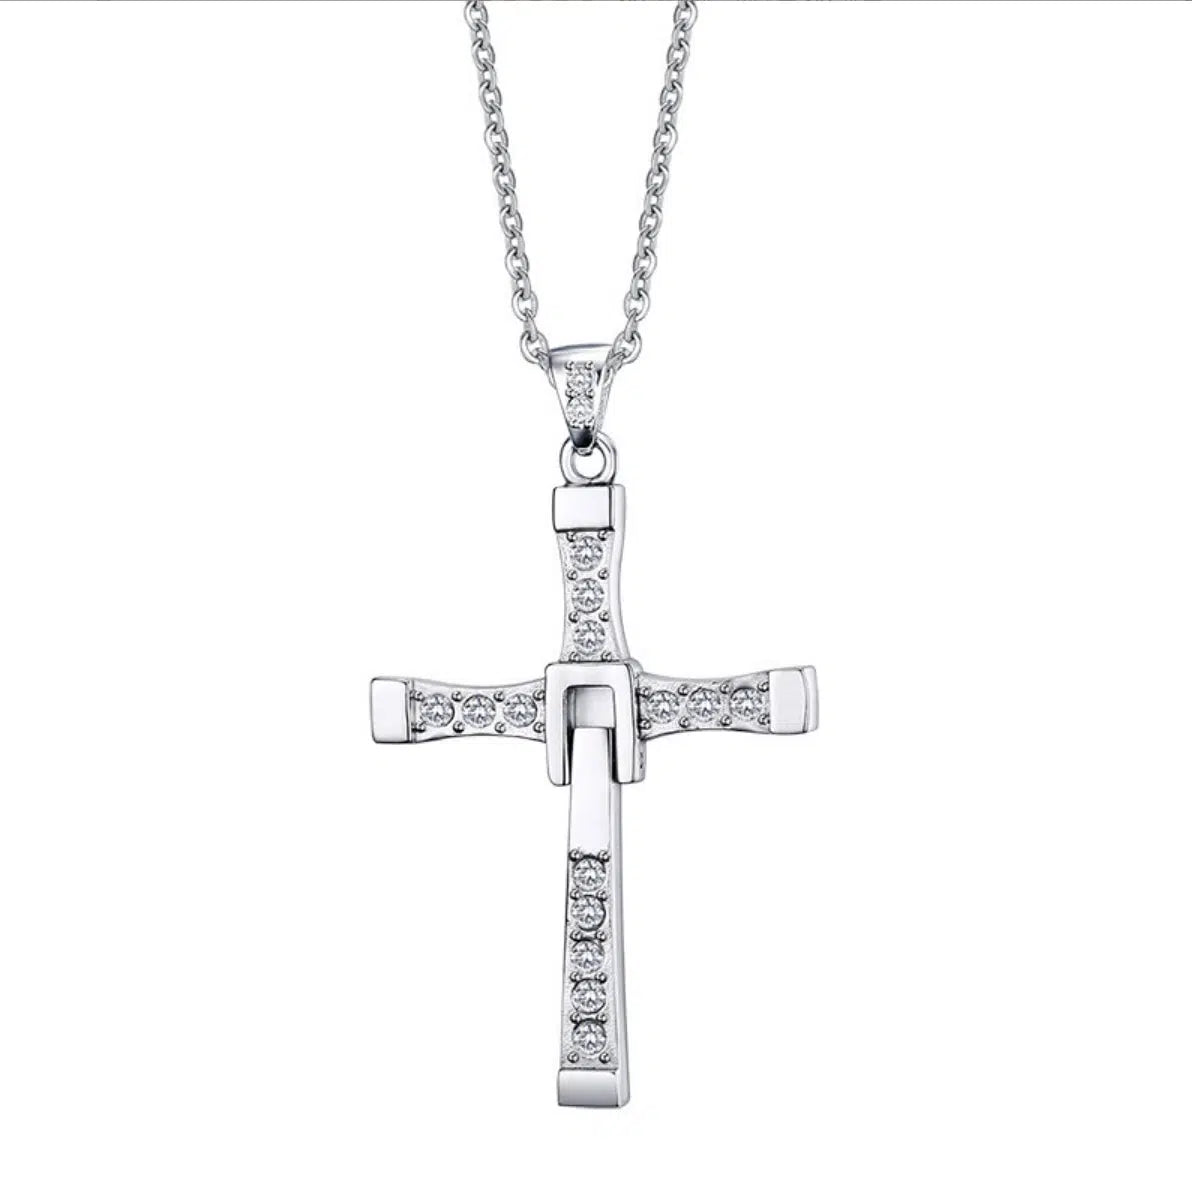 Cross Chain Necklace with Cubic Zirconia-Cross Necklace-Auswara